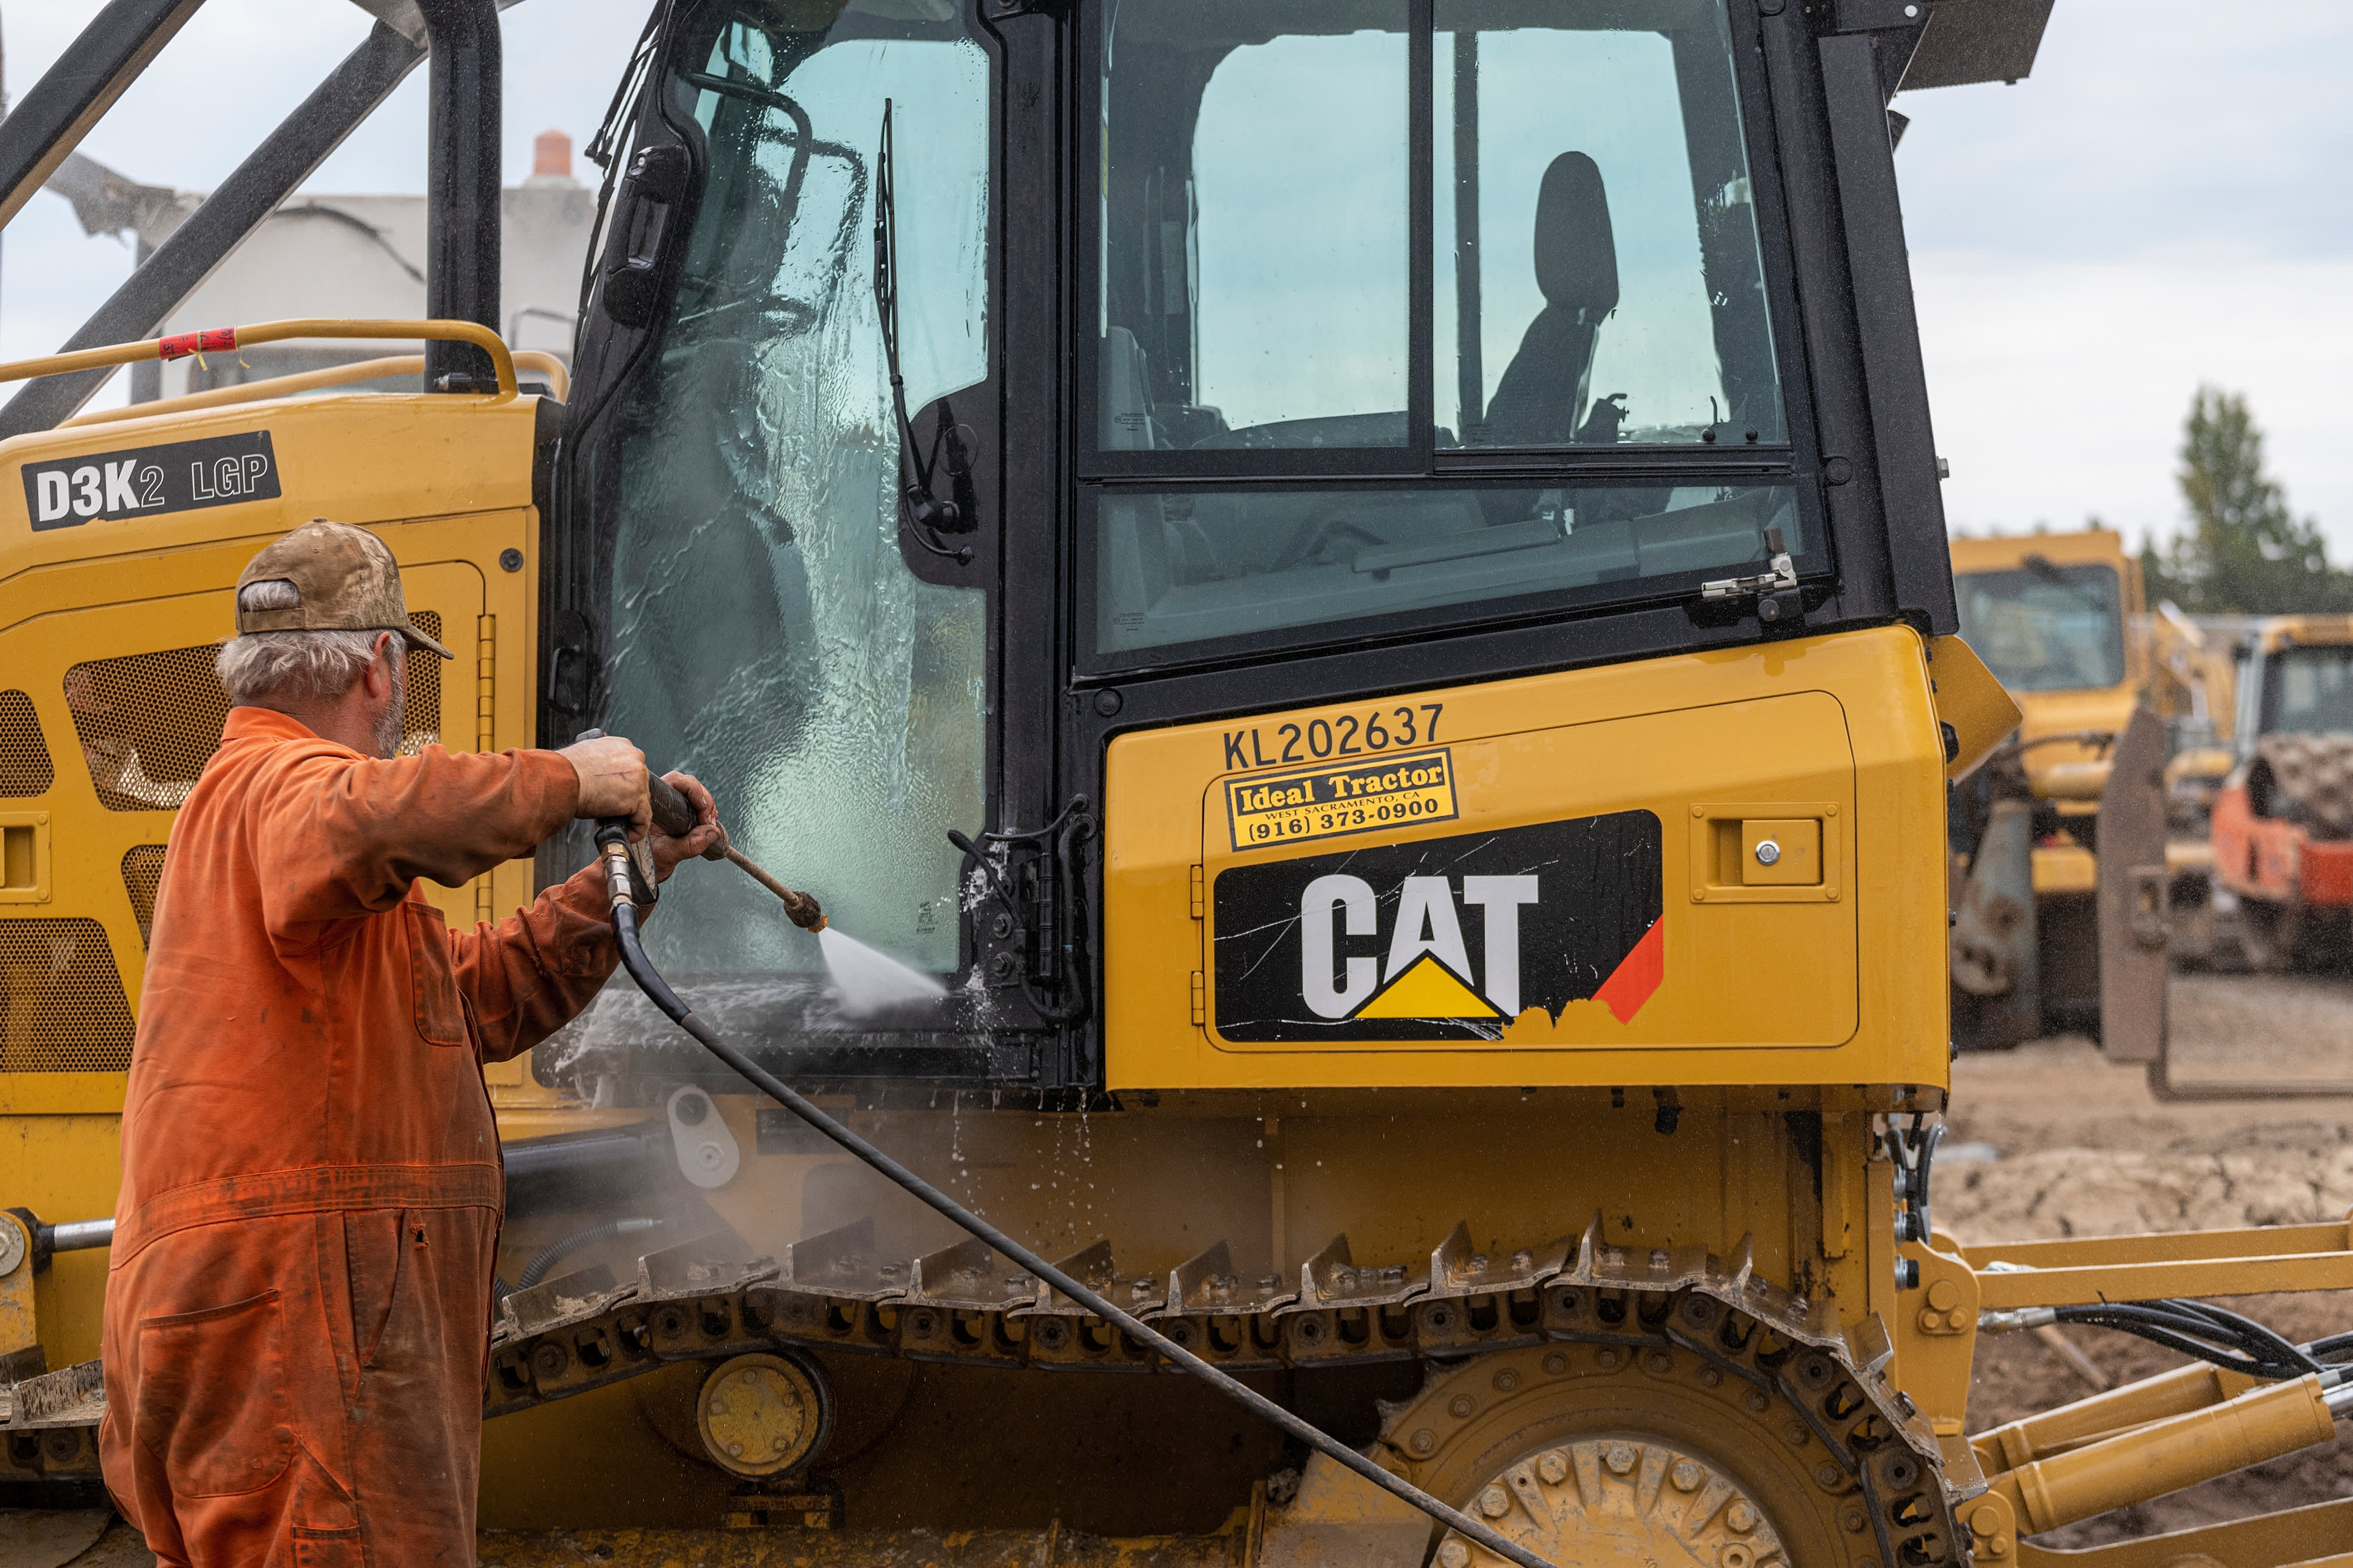 Caterpillar, General Motors and more – Earnings season may present a buying opportunity for stocks